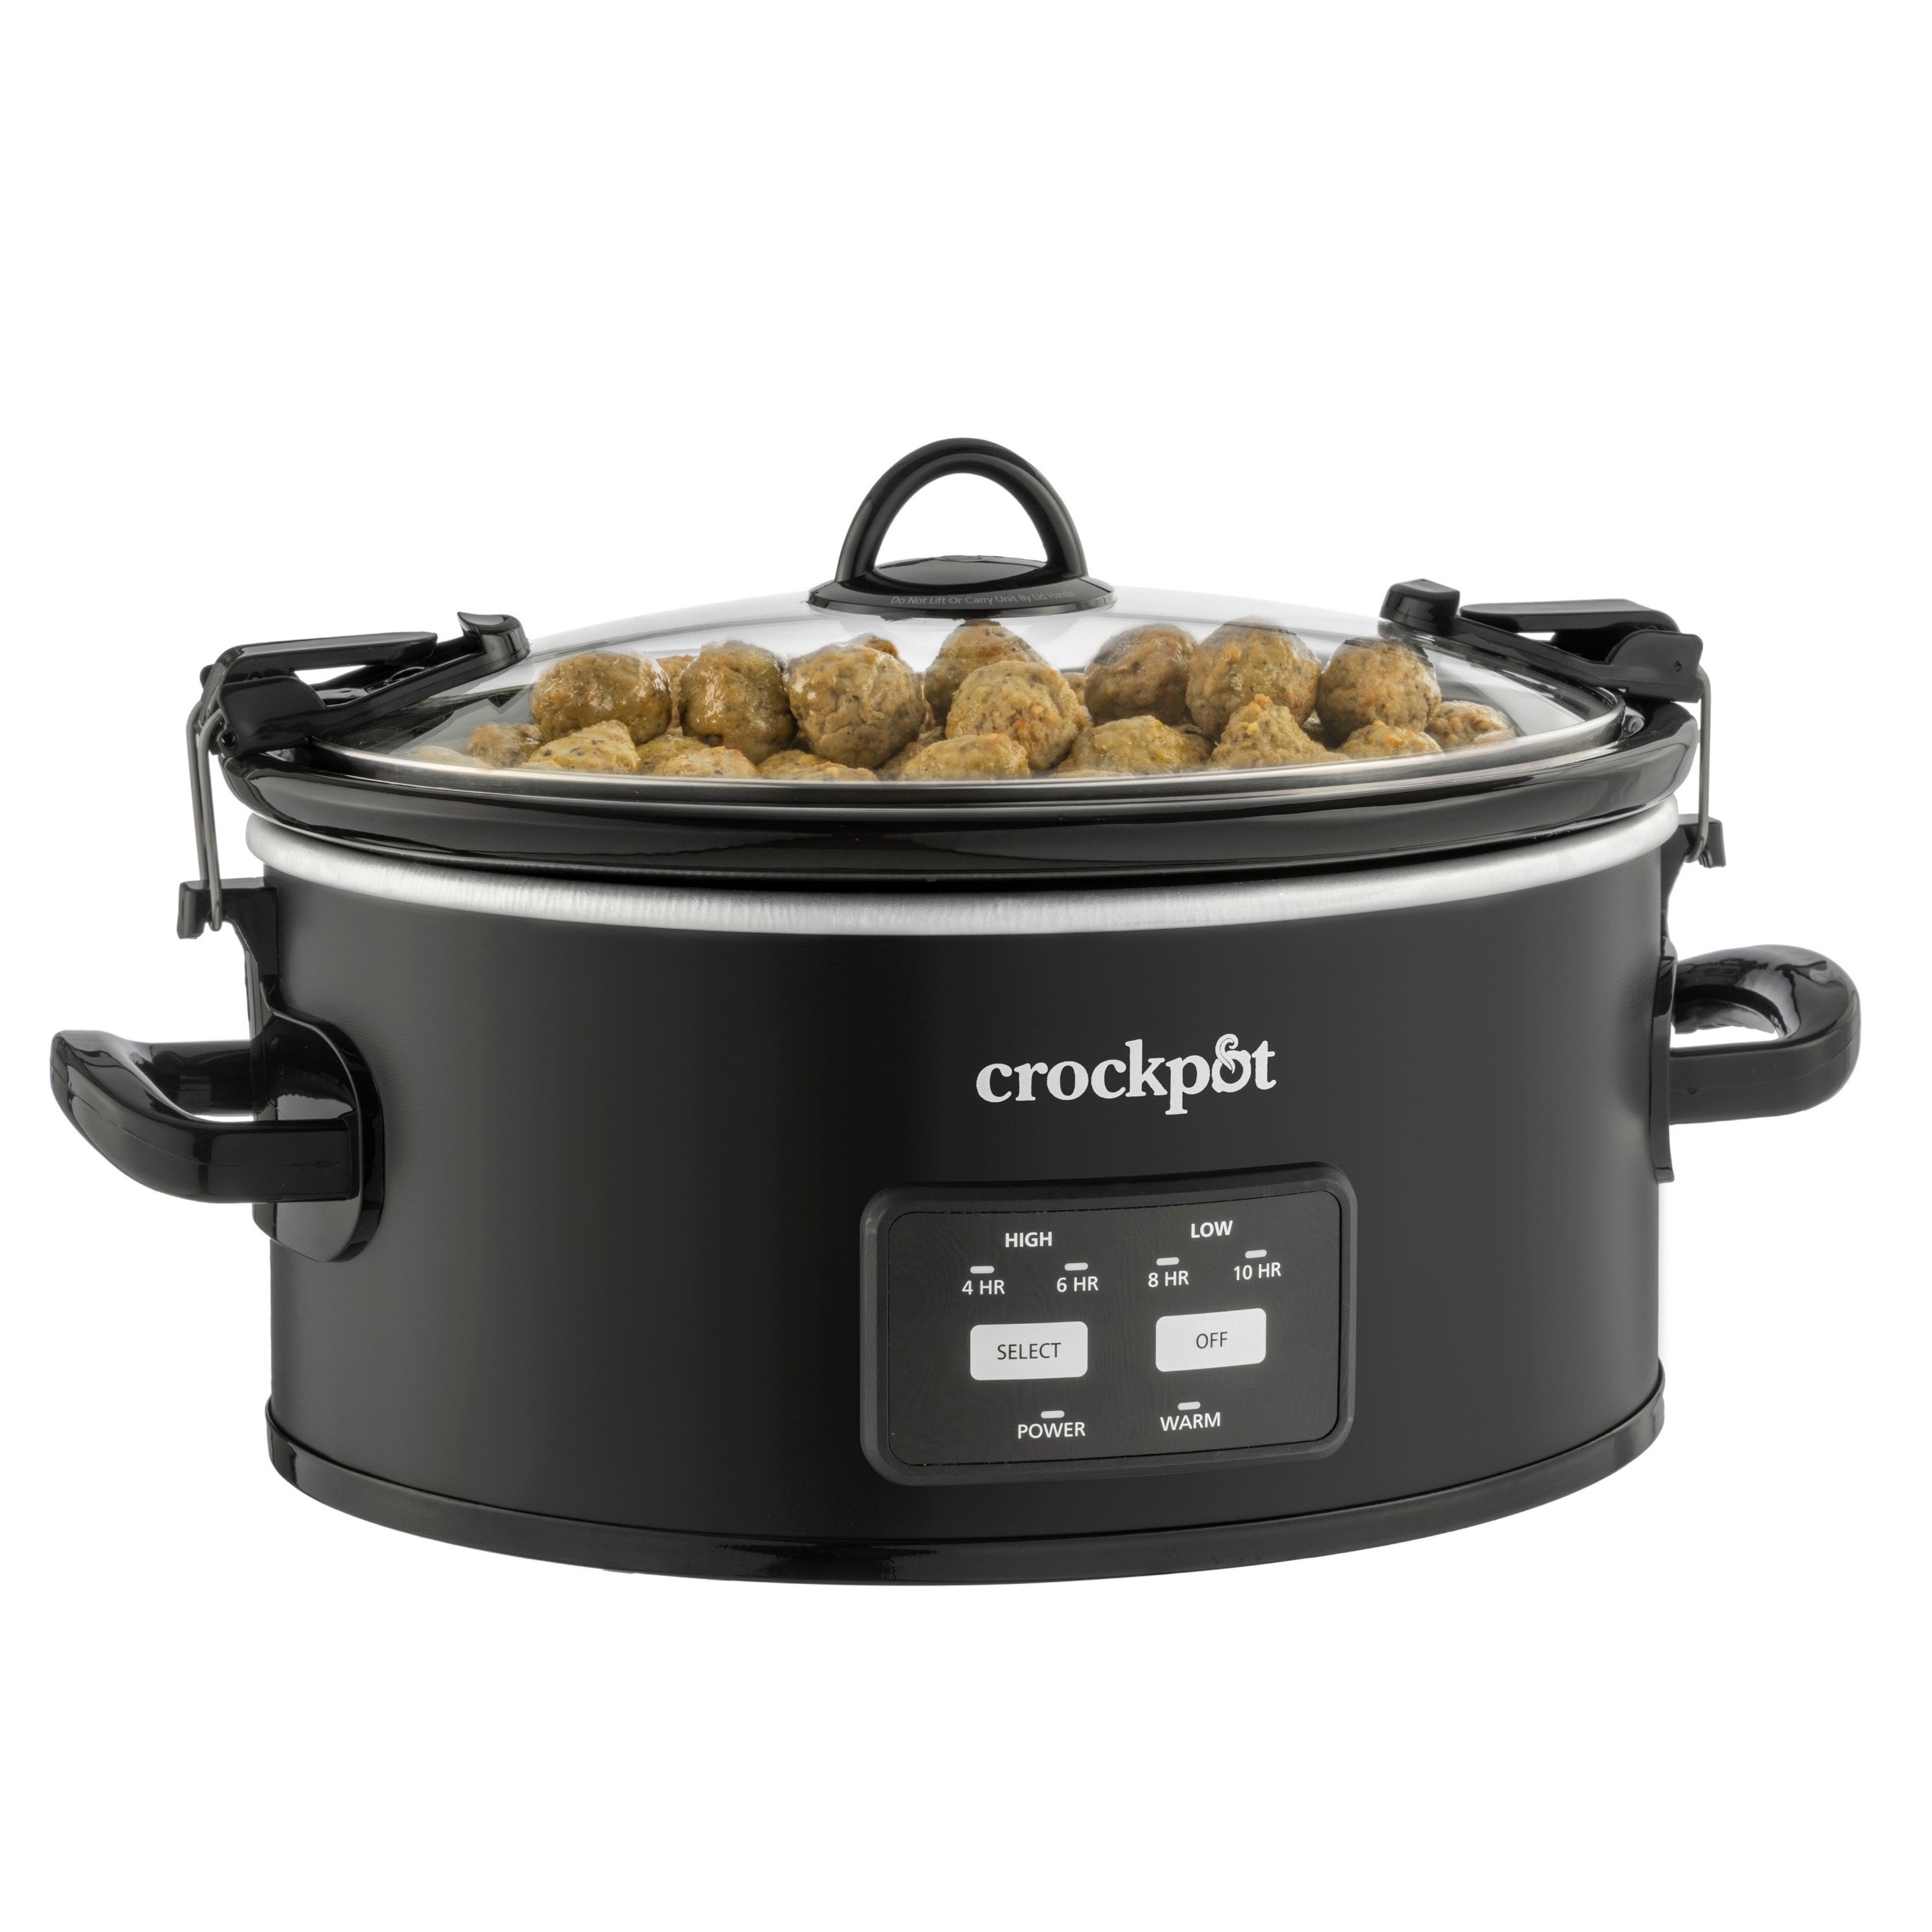 Crockpot Portable 6 Quart Slow Cooker with Locking Lid and Digital